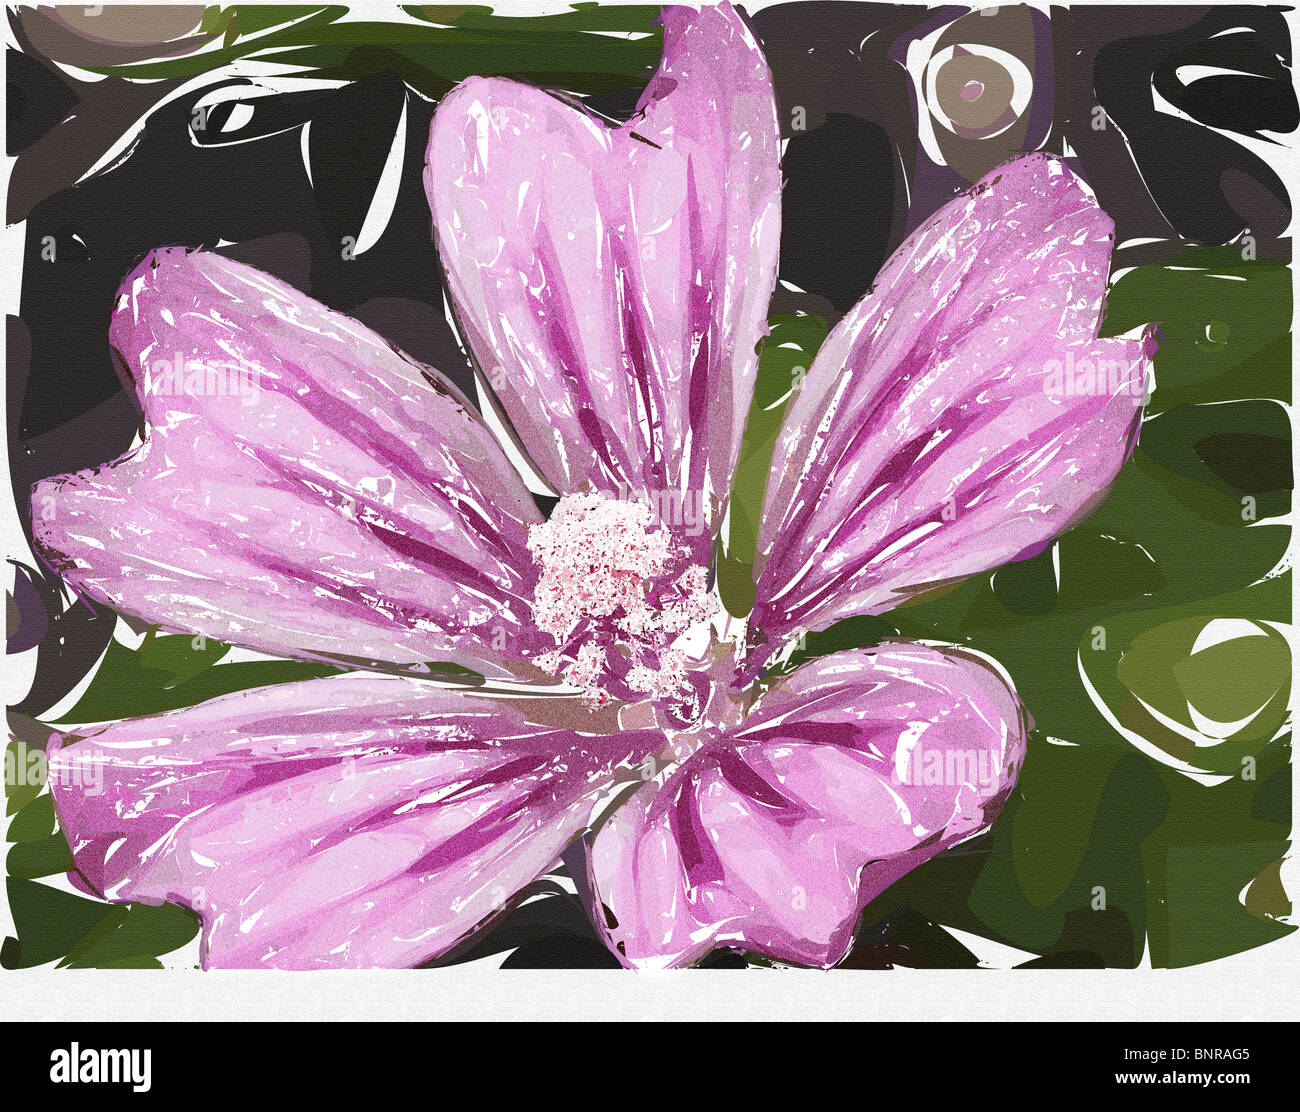 Lilac, flower with petals and pistil, with digital treatment, imitating a painting, illustration of a computer foreground. Stock Photo